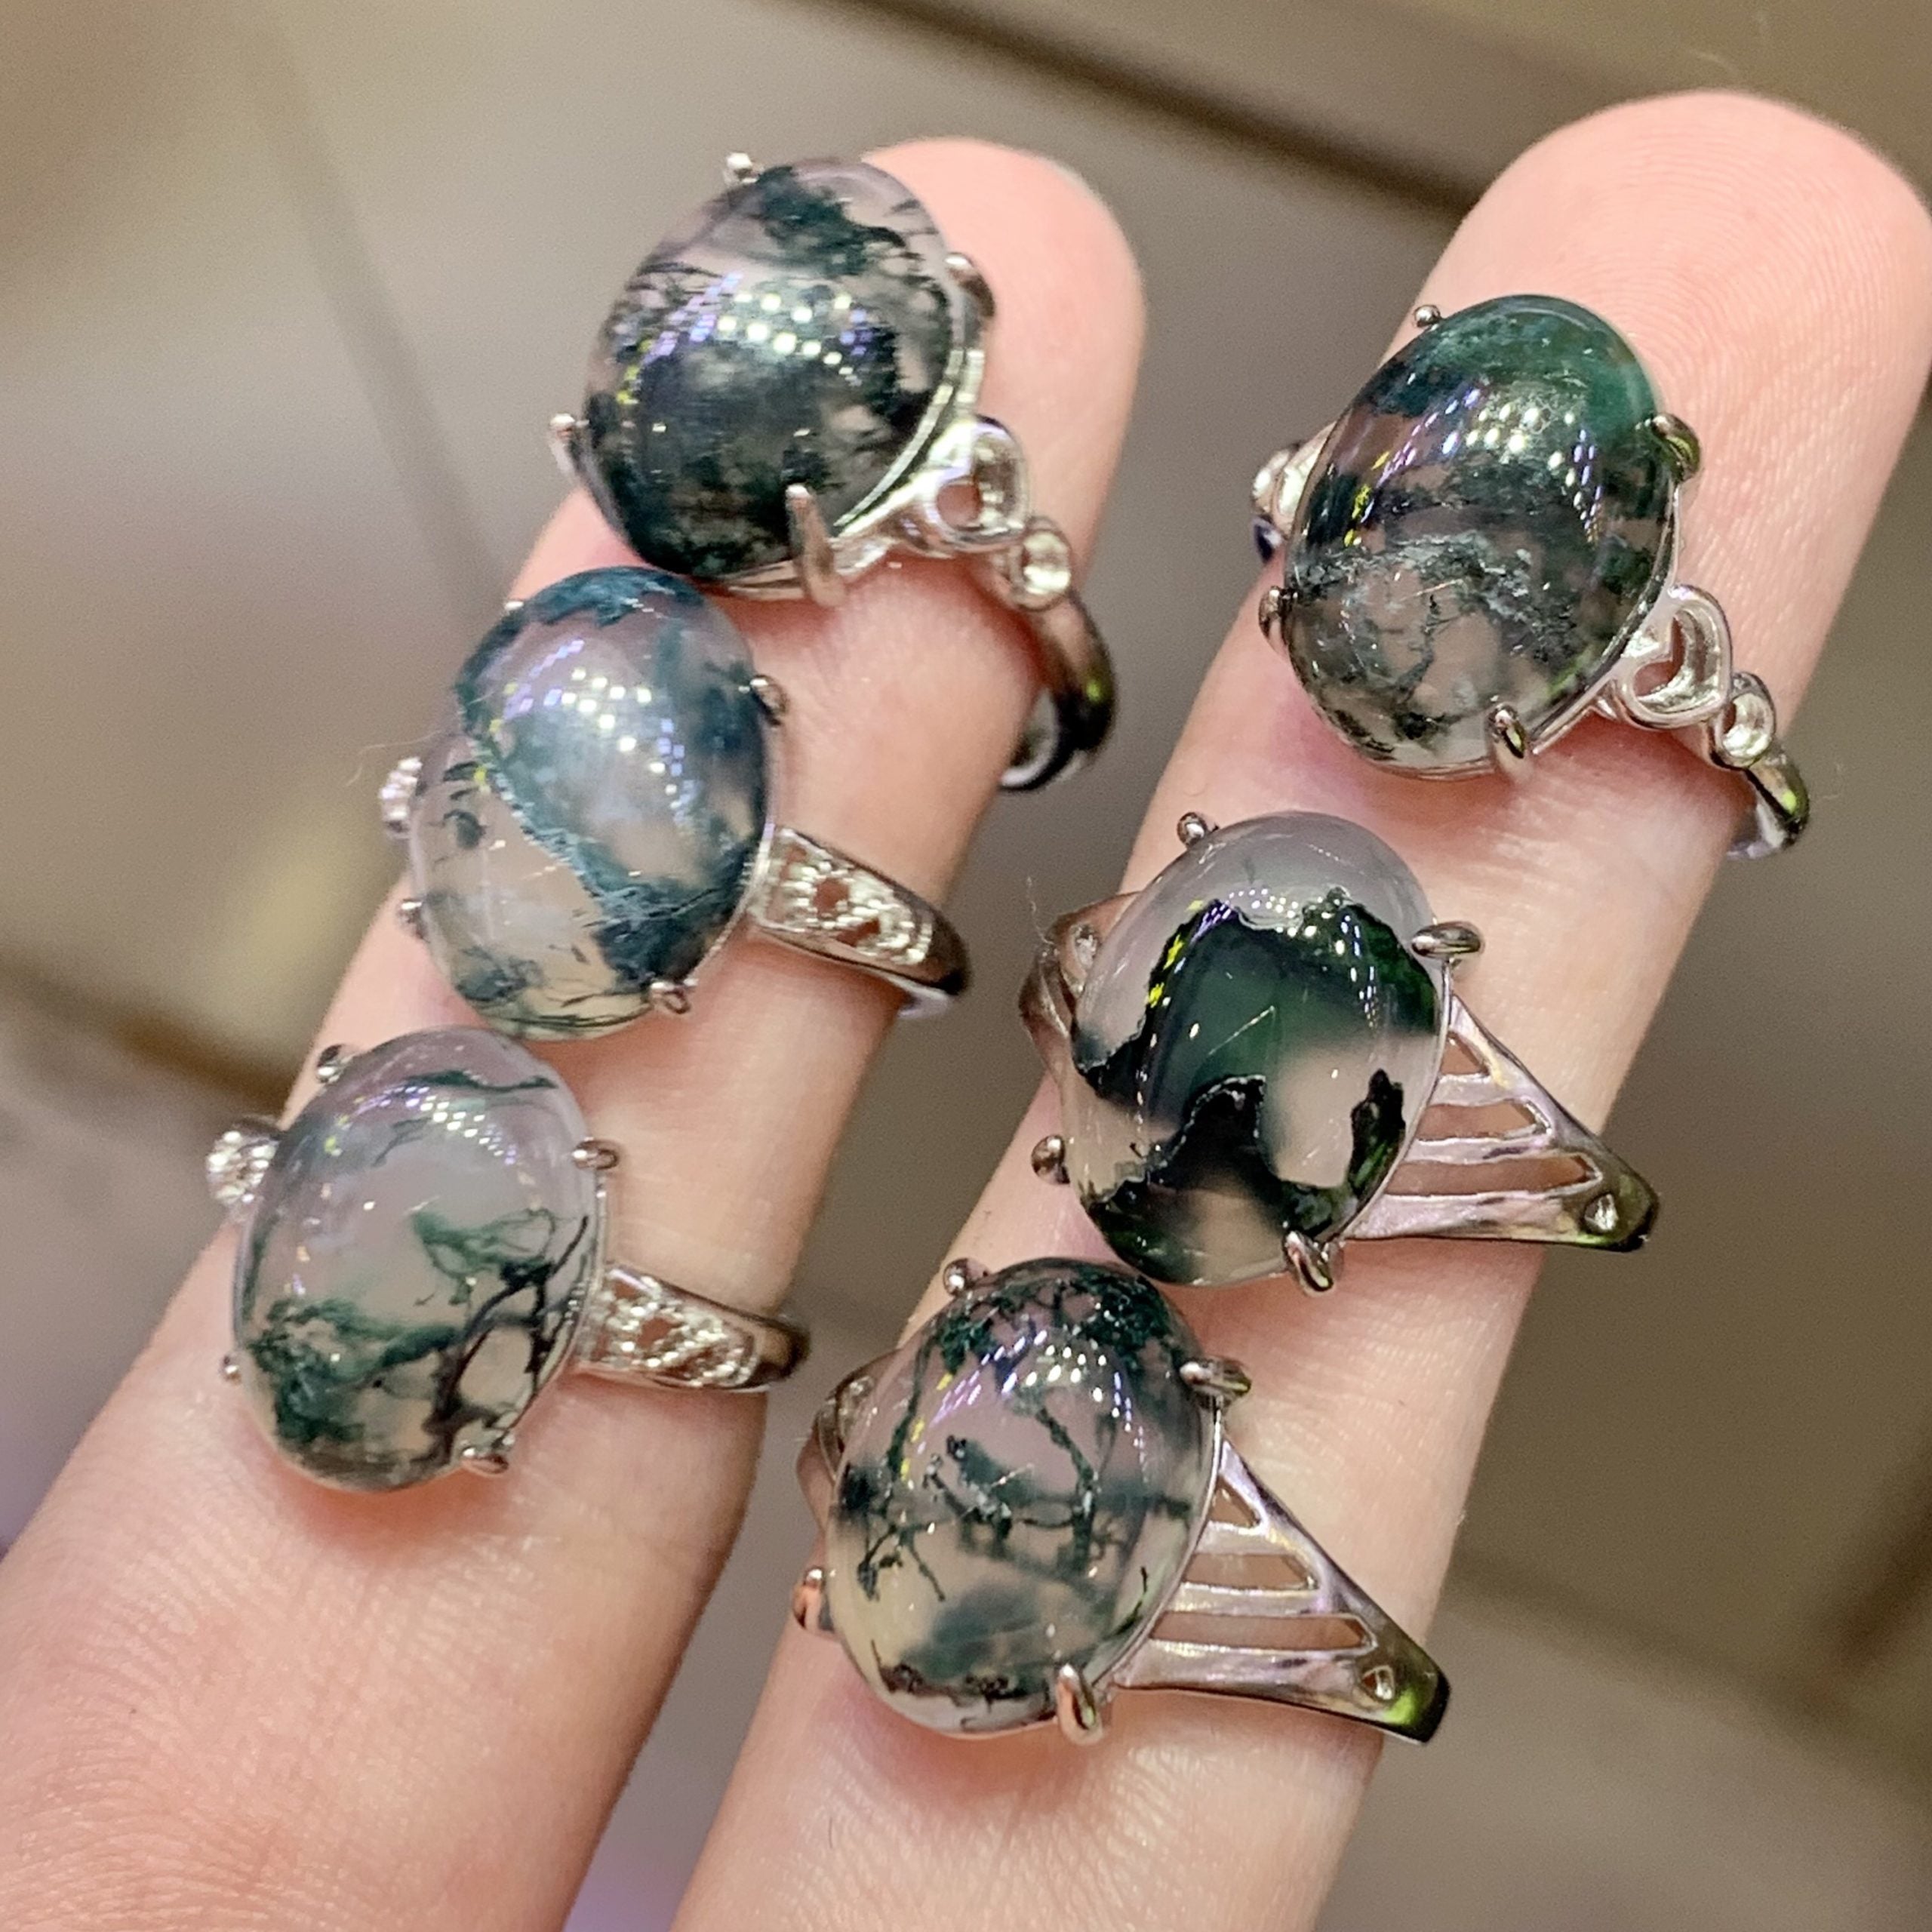 Mossagate ring